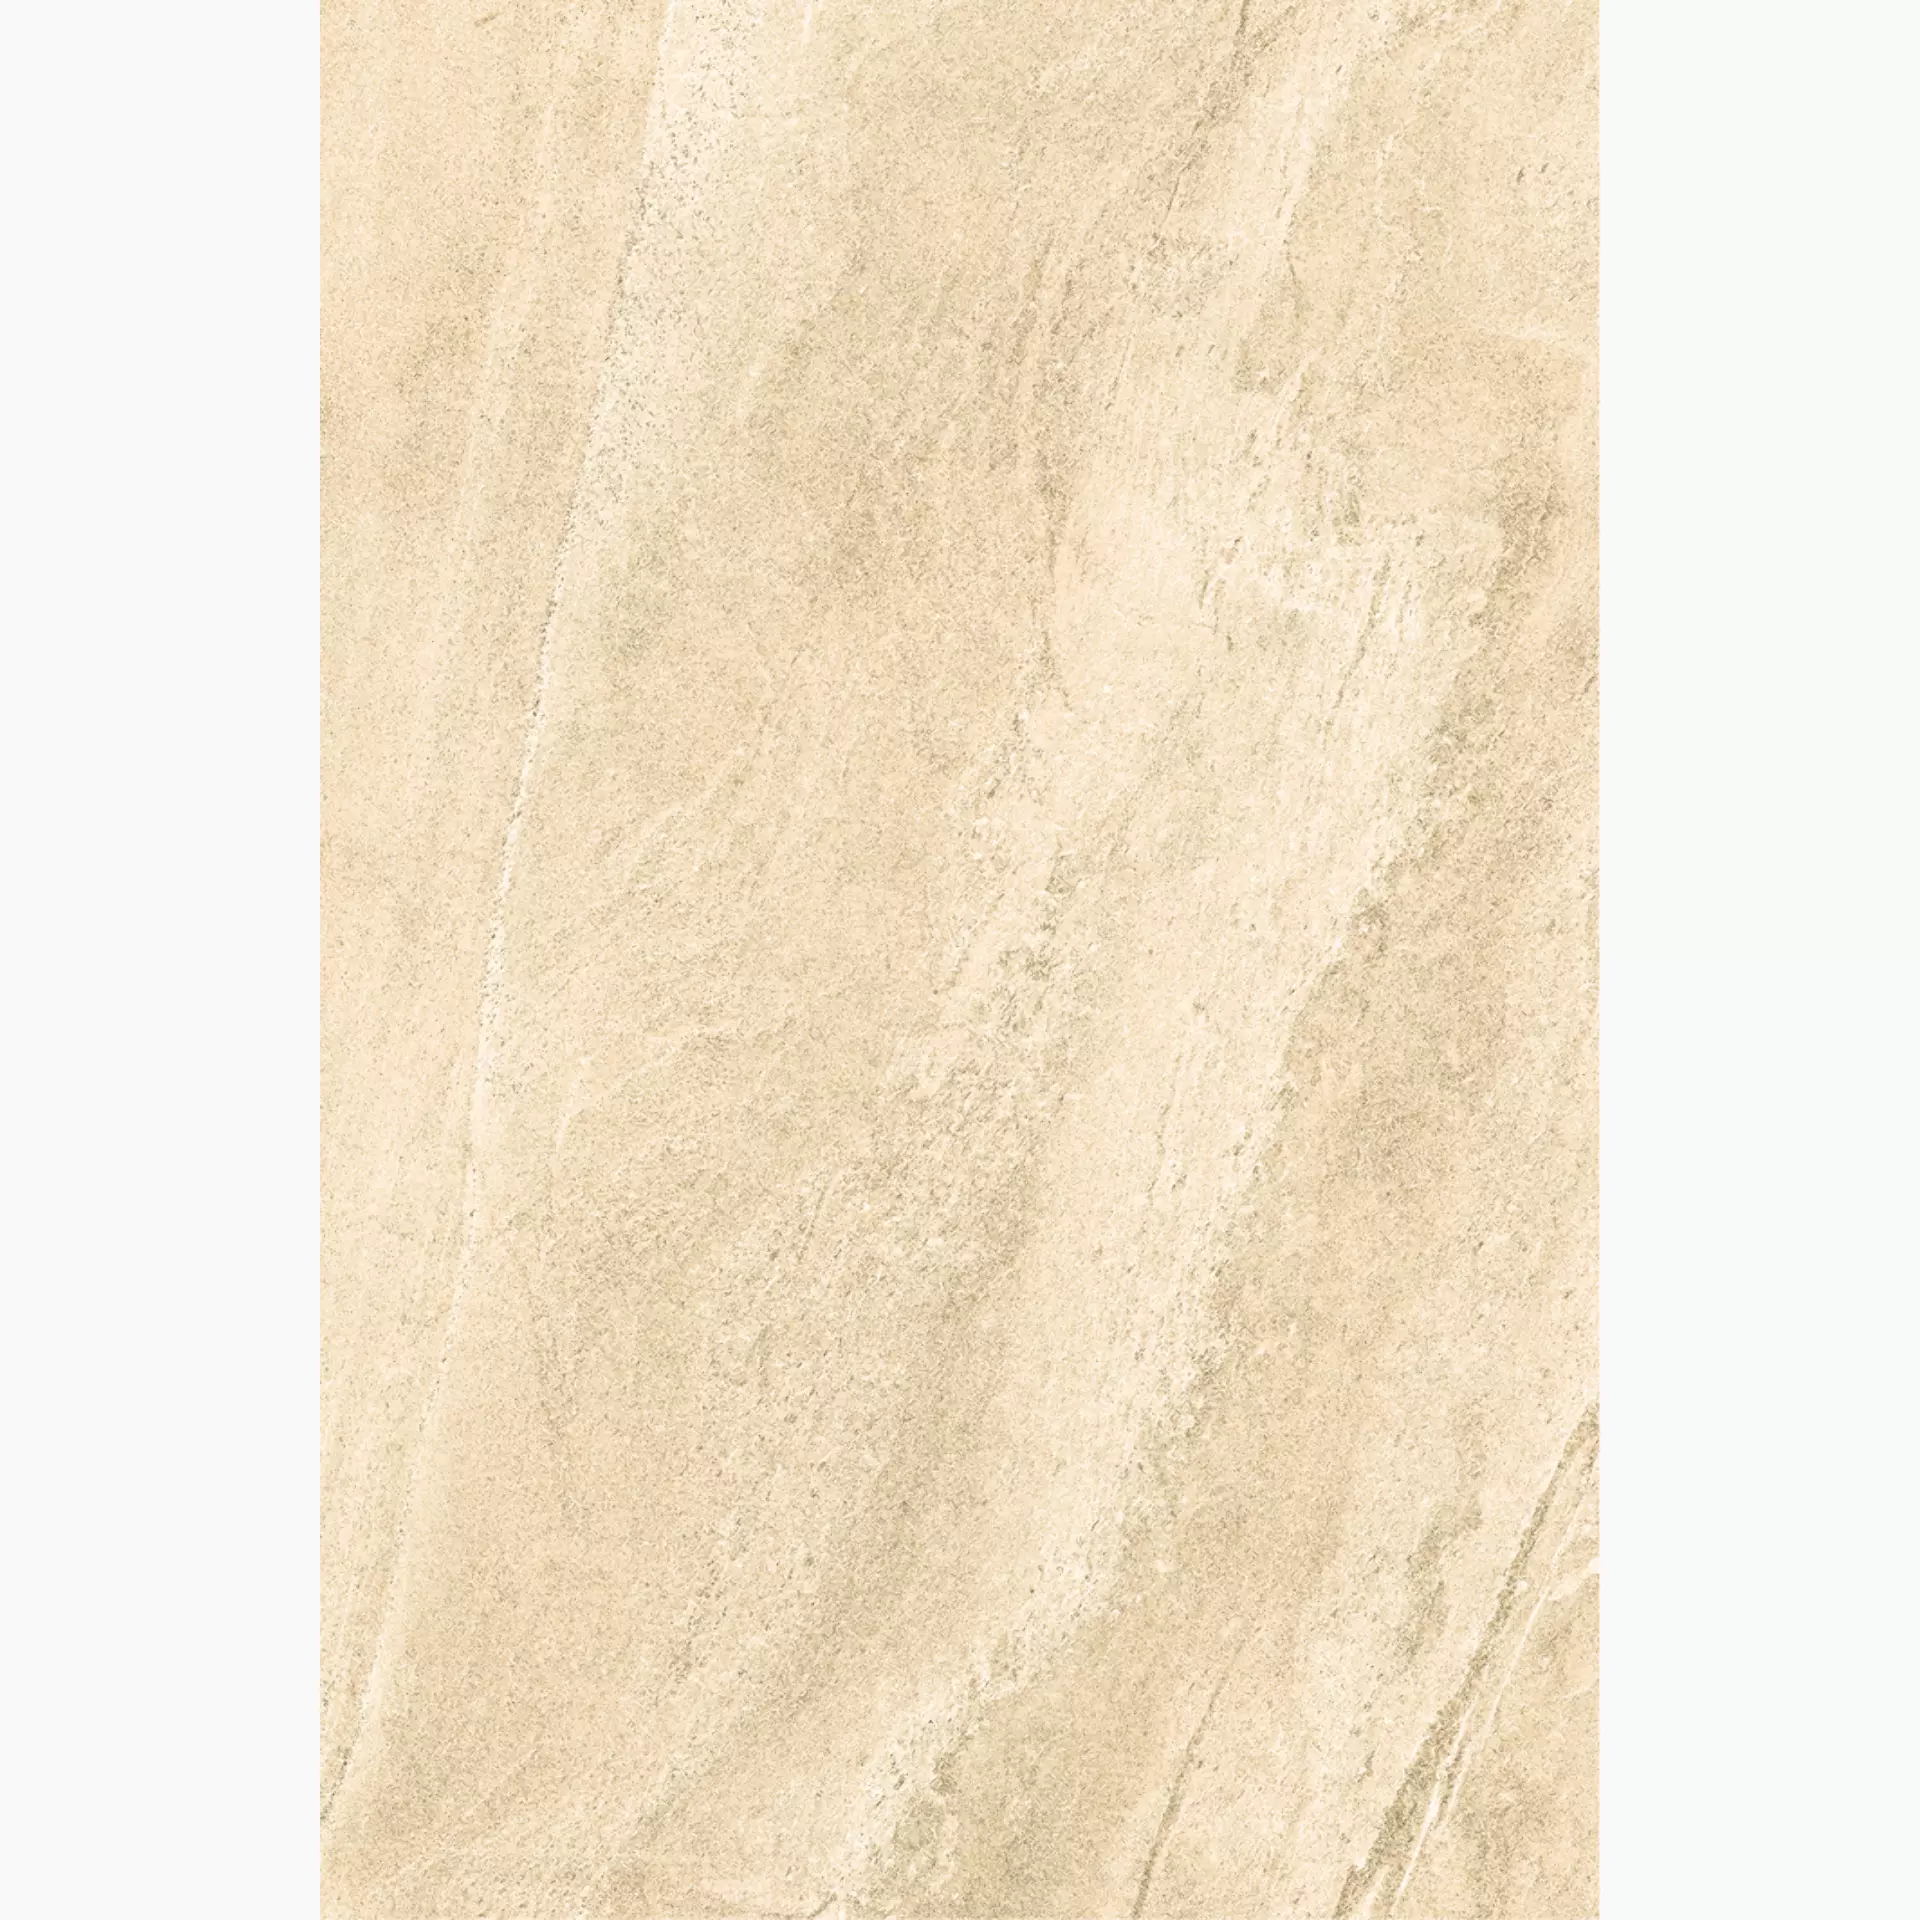 Novabell All Black Beige Naturale ALK49RT 60x90cm rectified 9mm